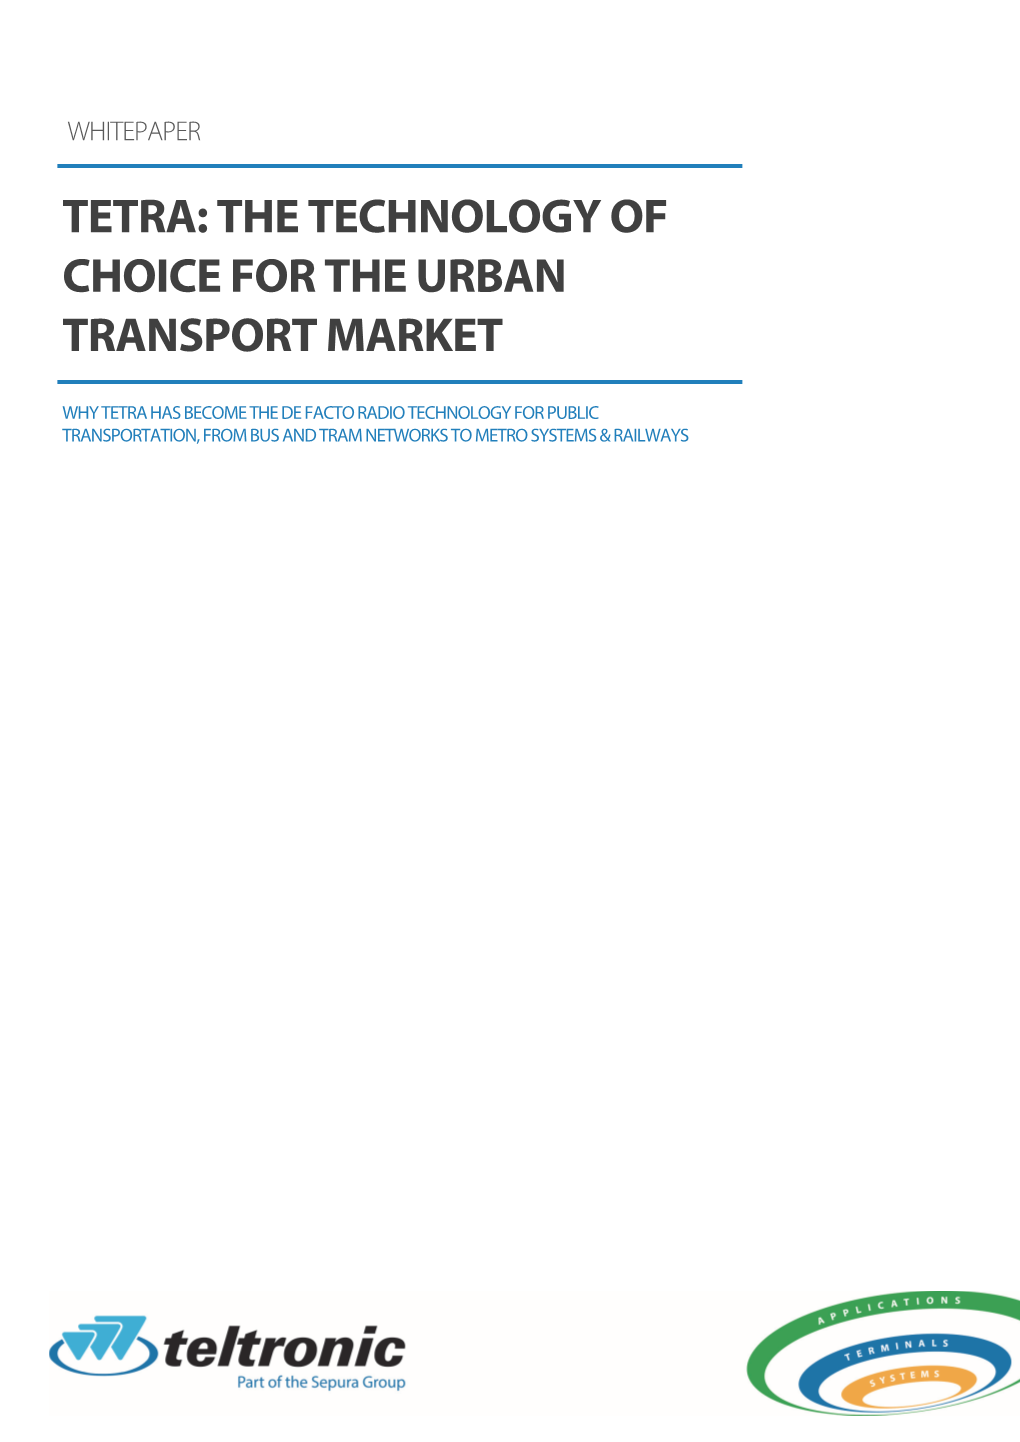 Tetra: the Technology of Choice for the Urban